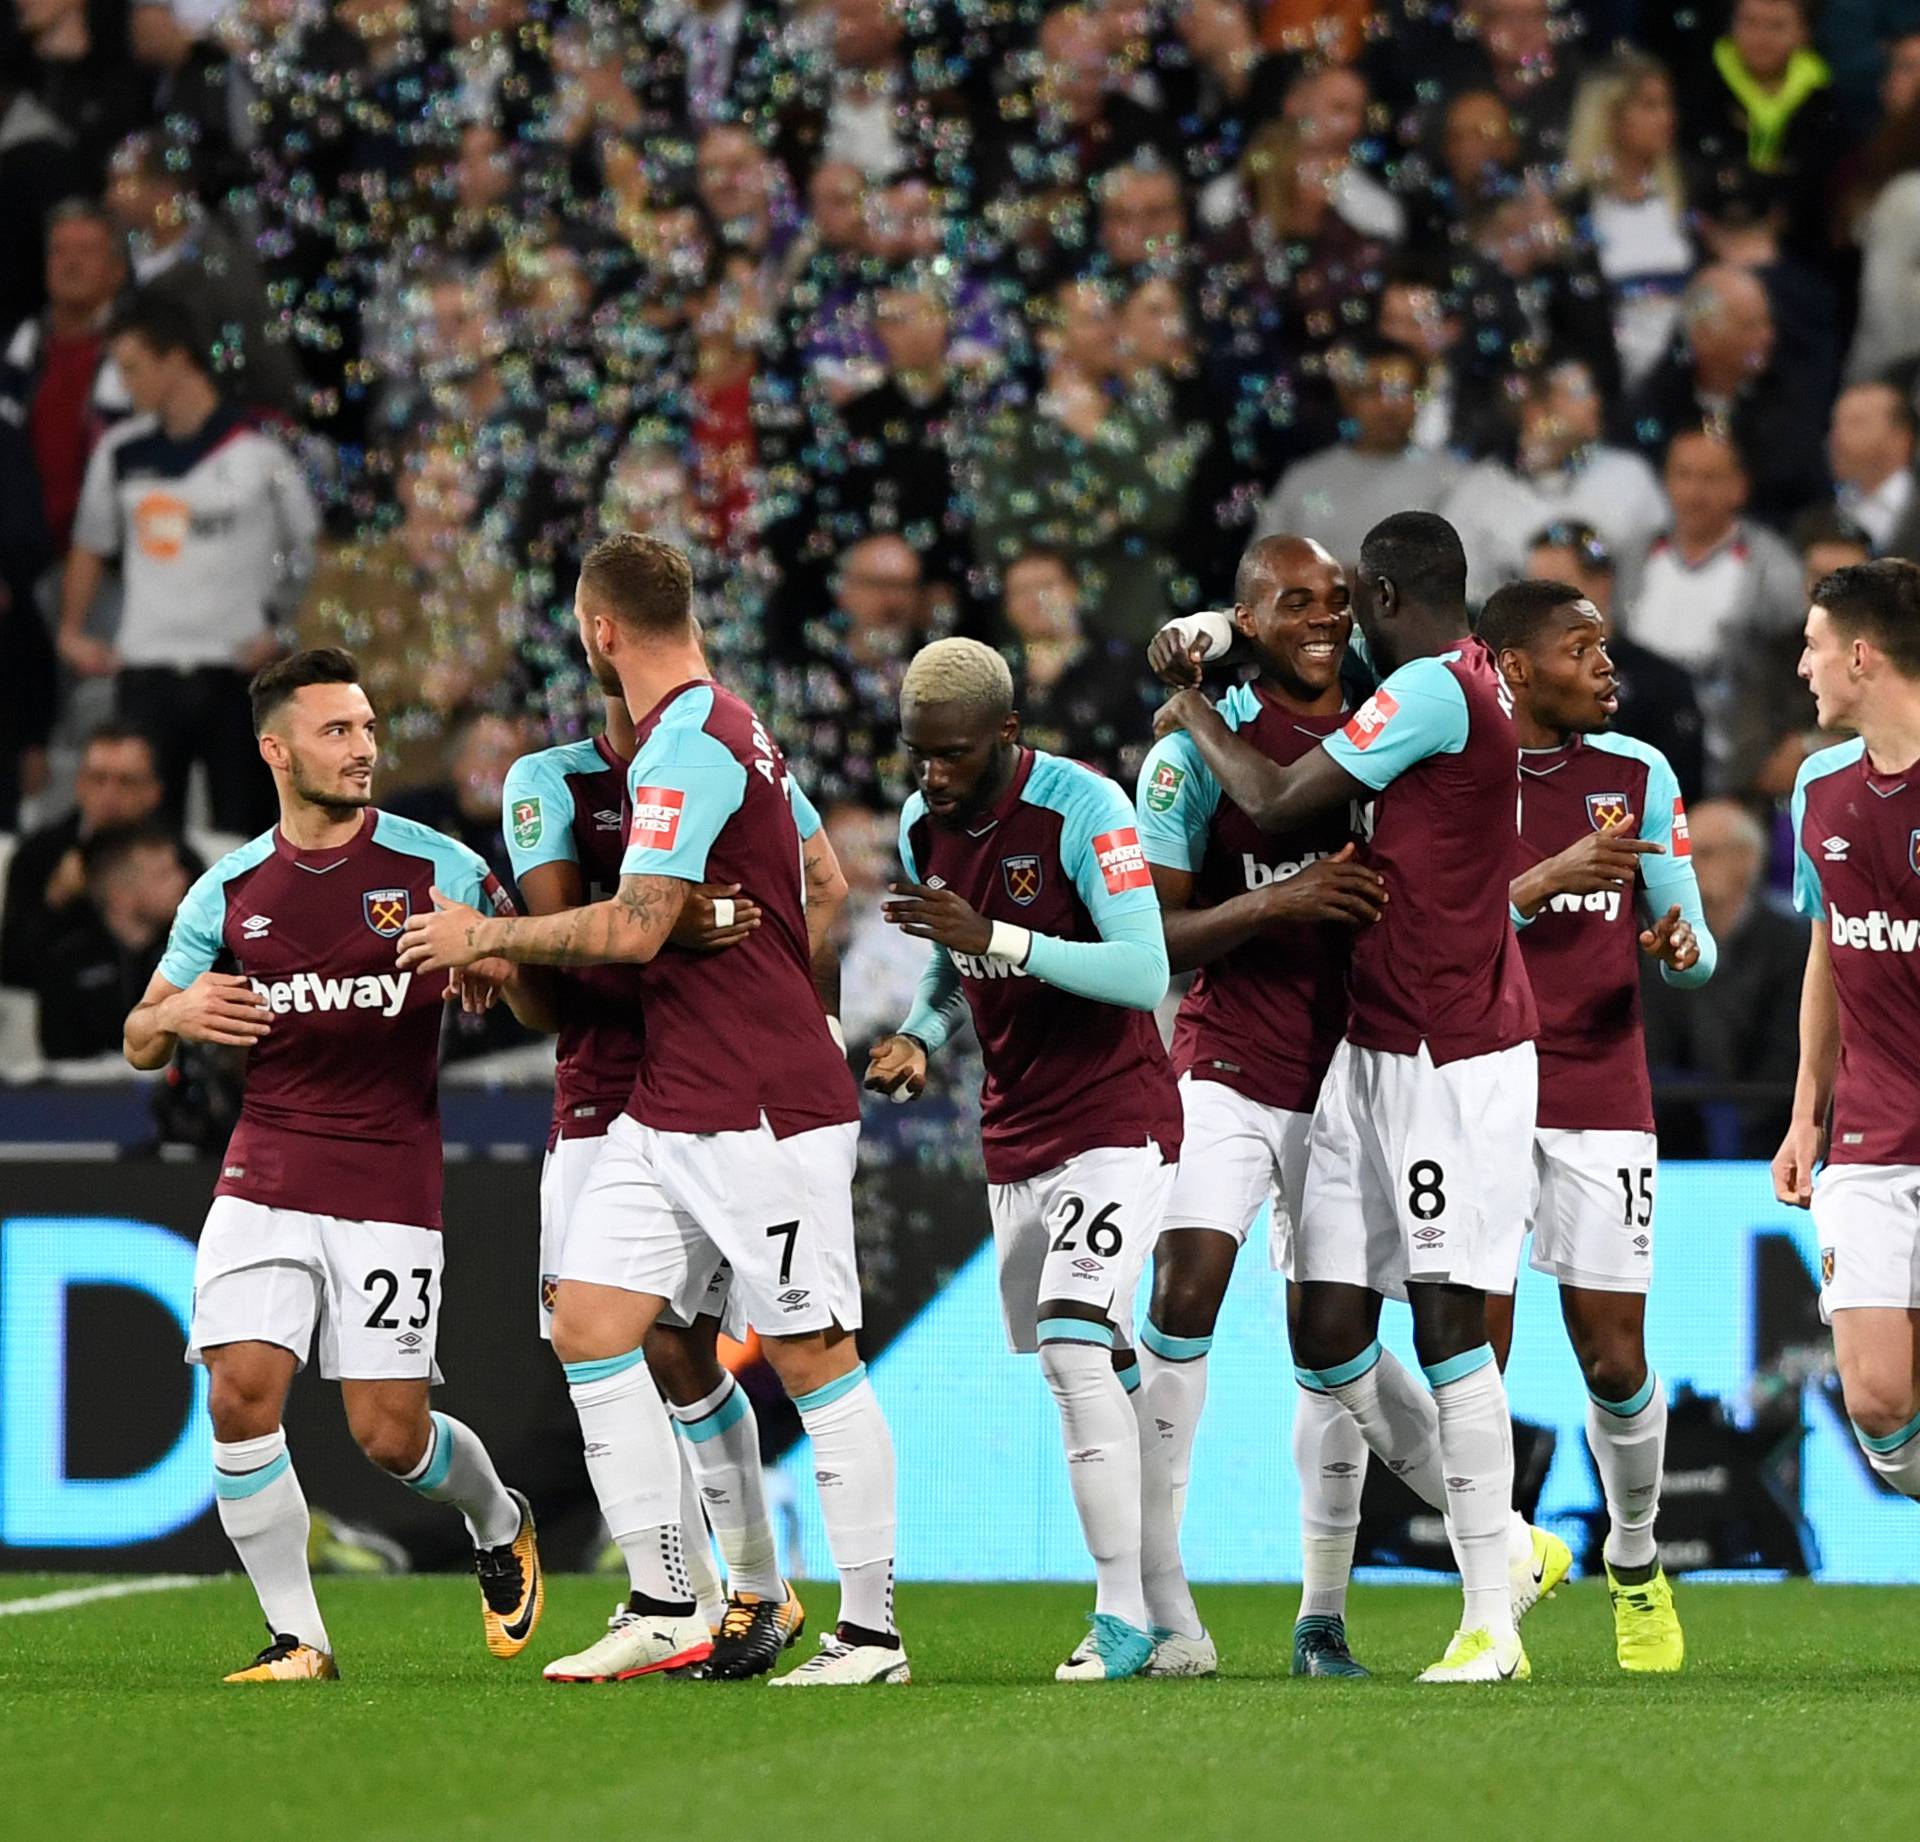 Carabao Cup Third Round - West Ham United vs Bolton Wanderers